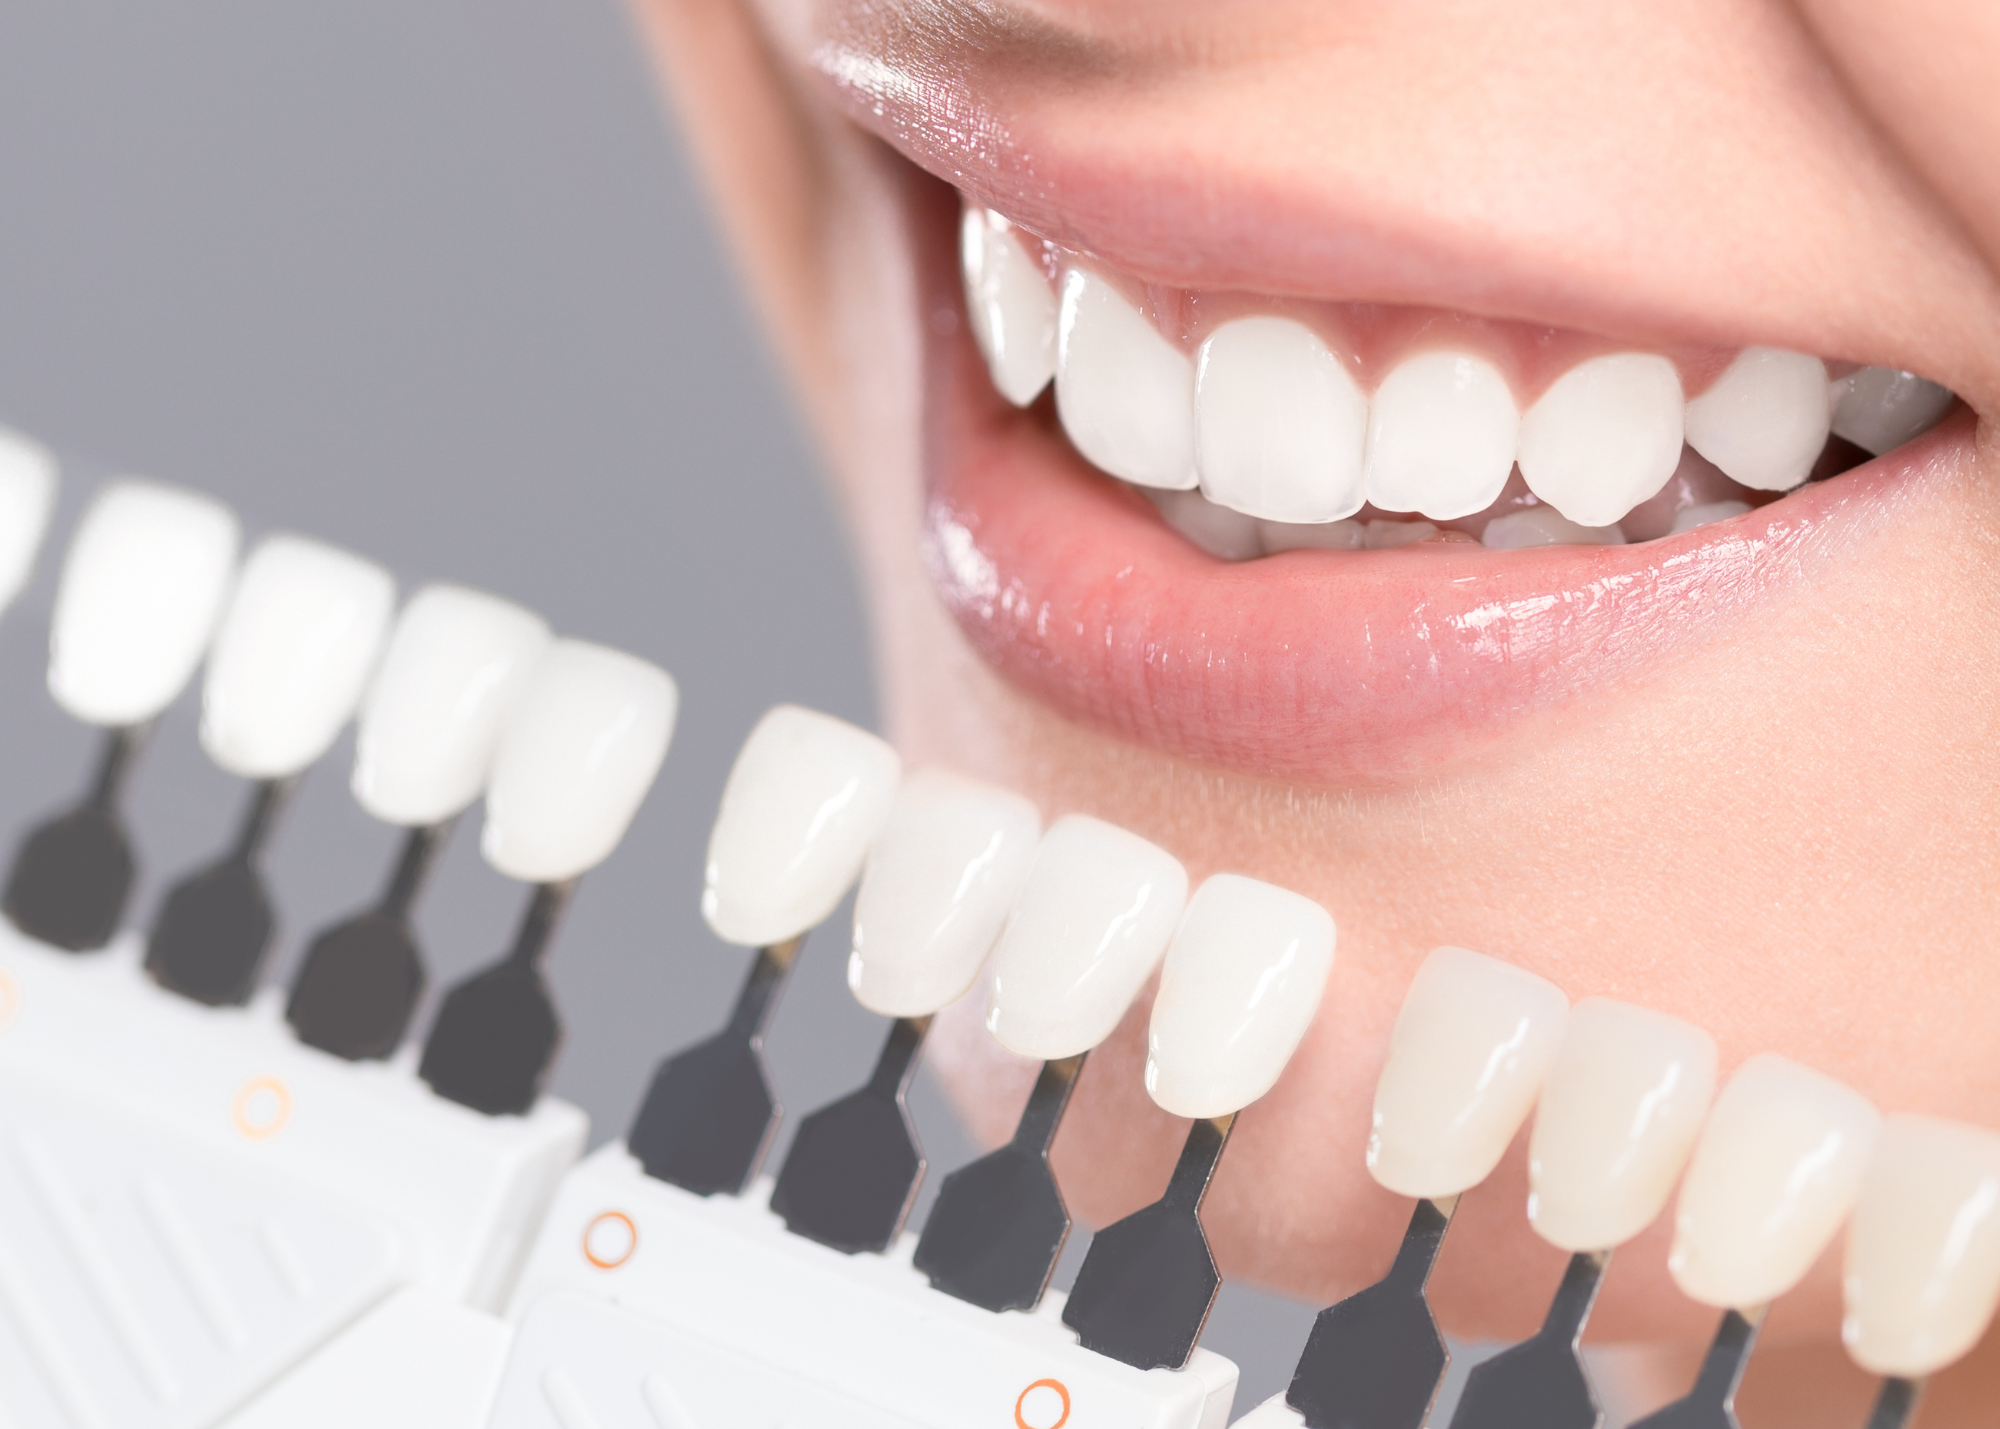 The Truth About Teeth MySmile Teeth Whitening Strips: What You Need to Know